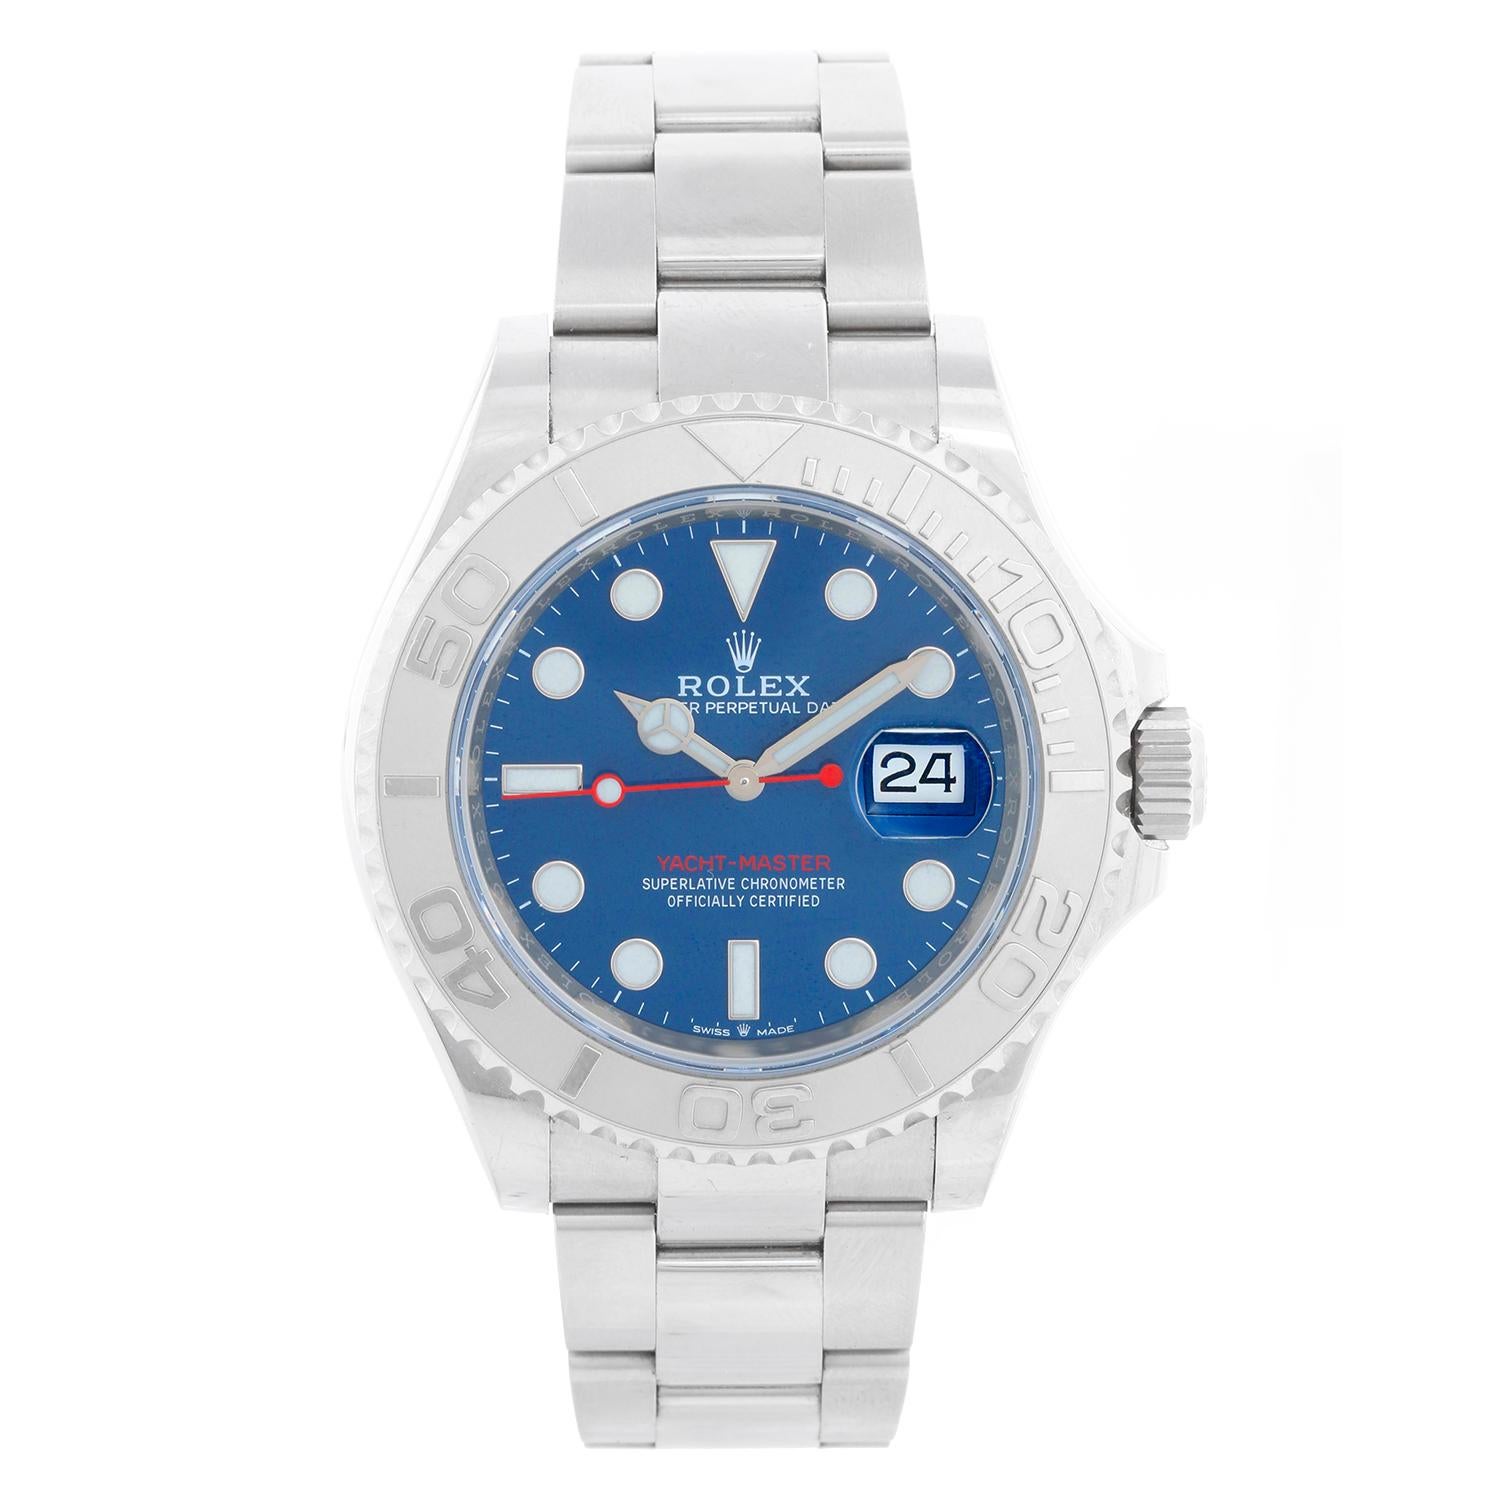 Rolex Yacht-Master Men's Stainless Steel Watch 126622 For Sale 4